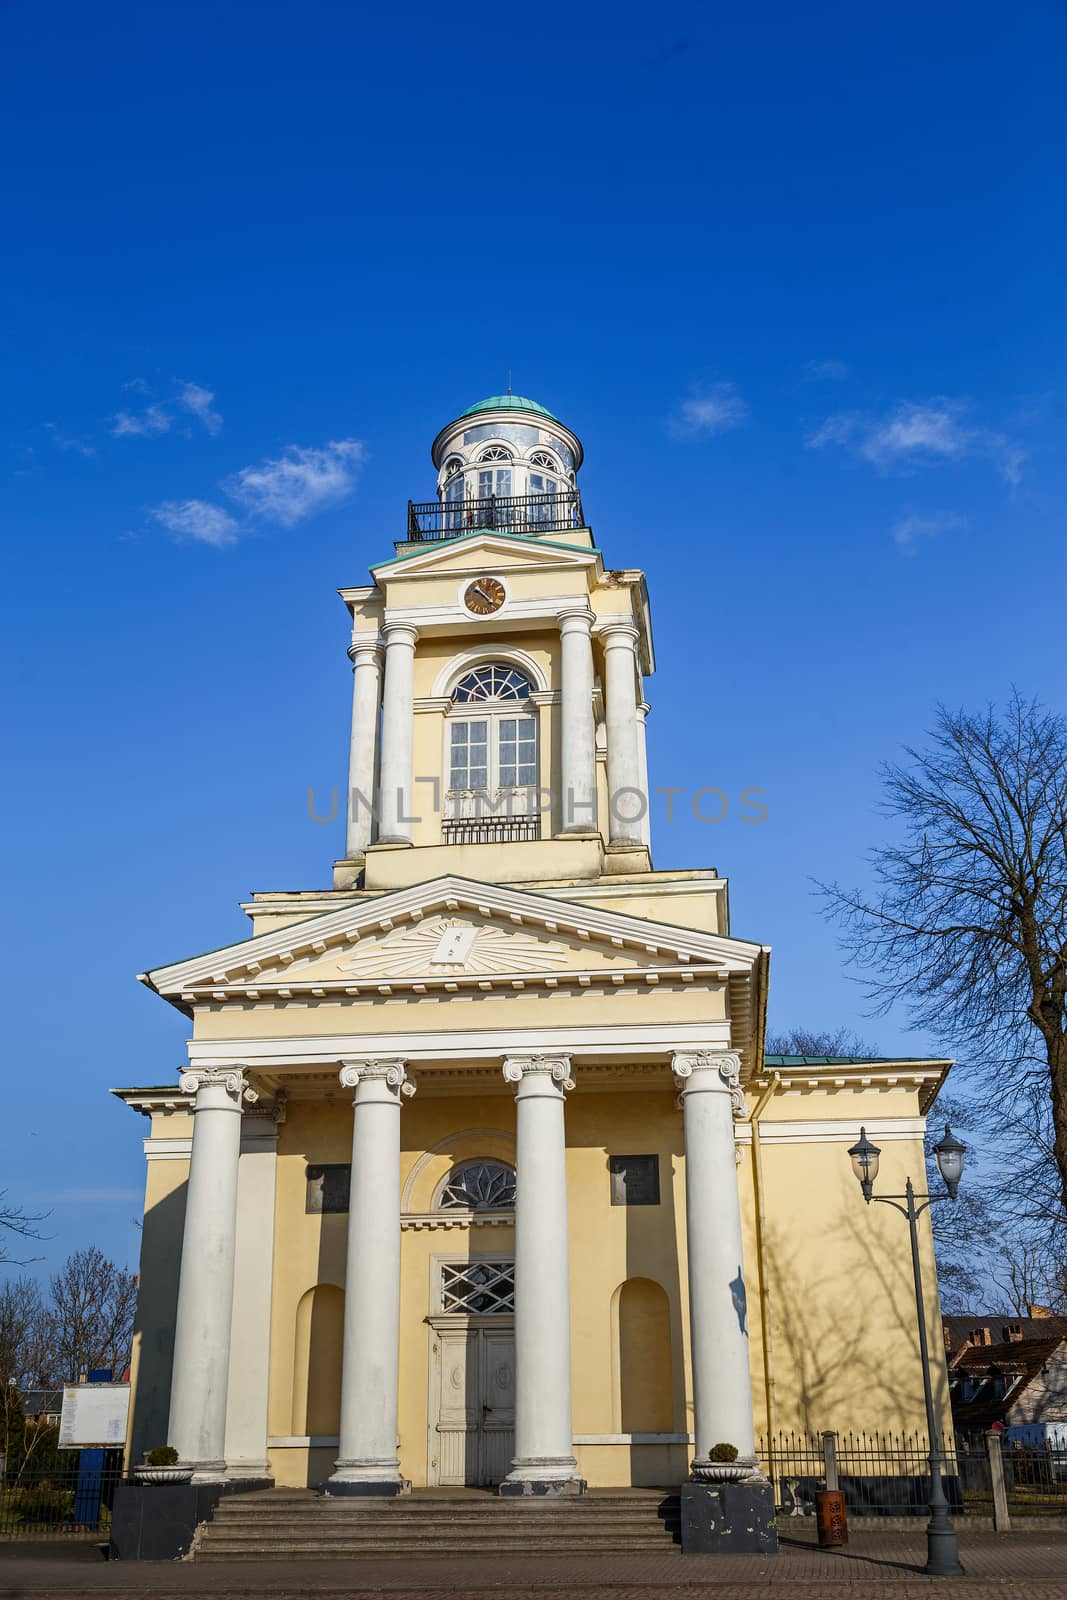 Lutheran Church in the Town Hall Square,Ventspils,Latvia